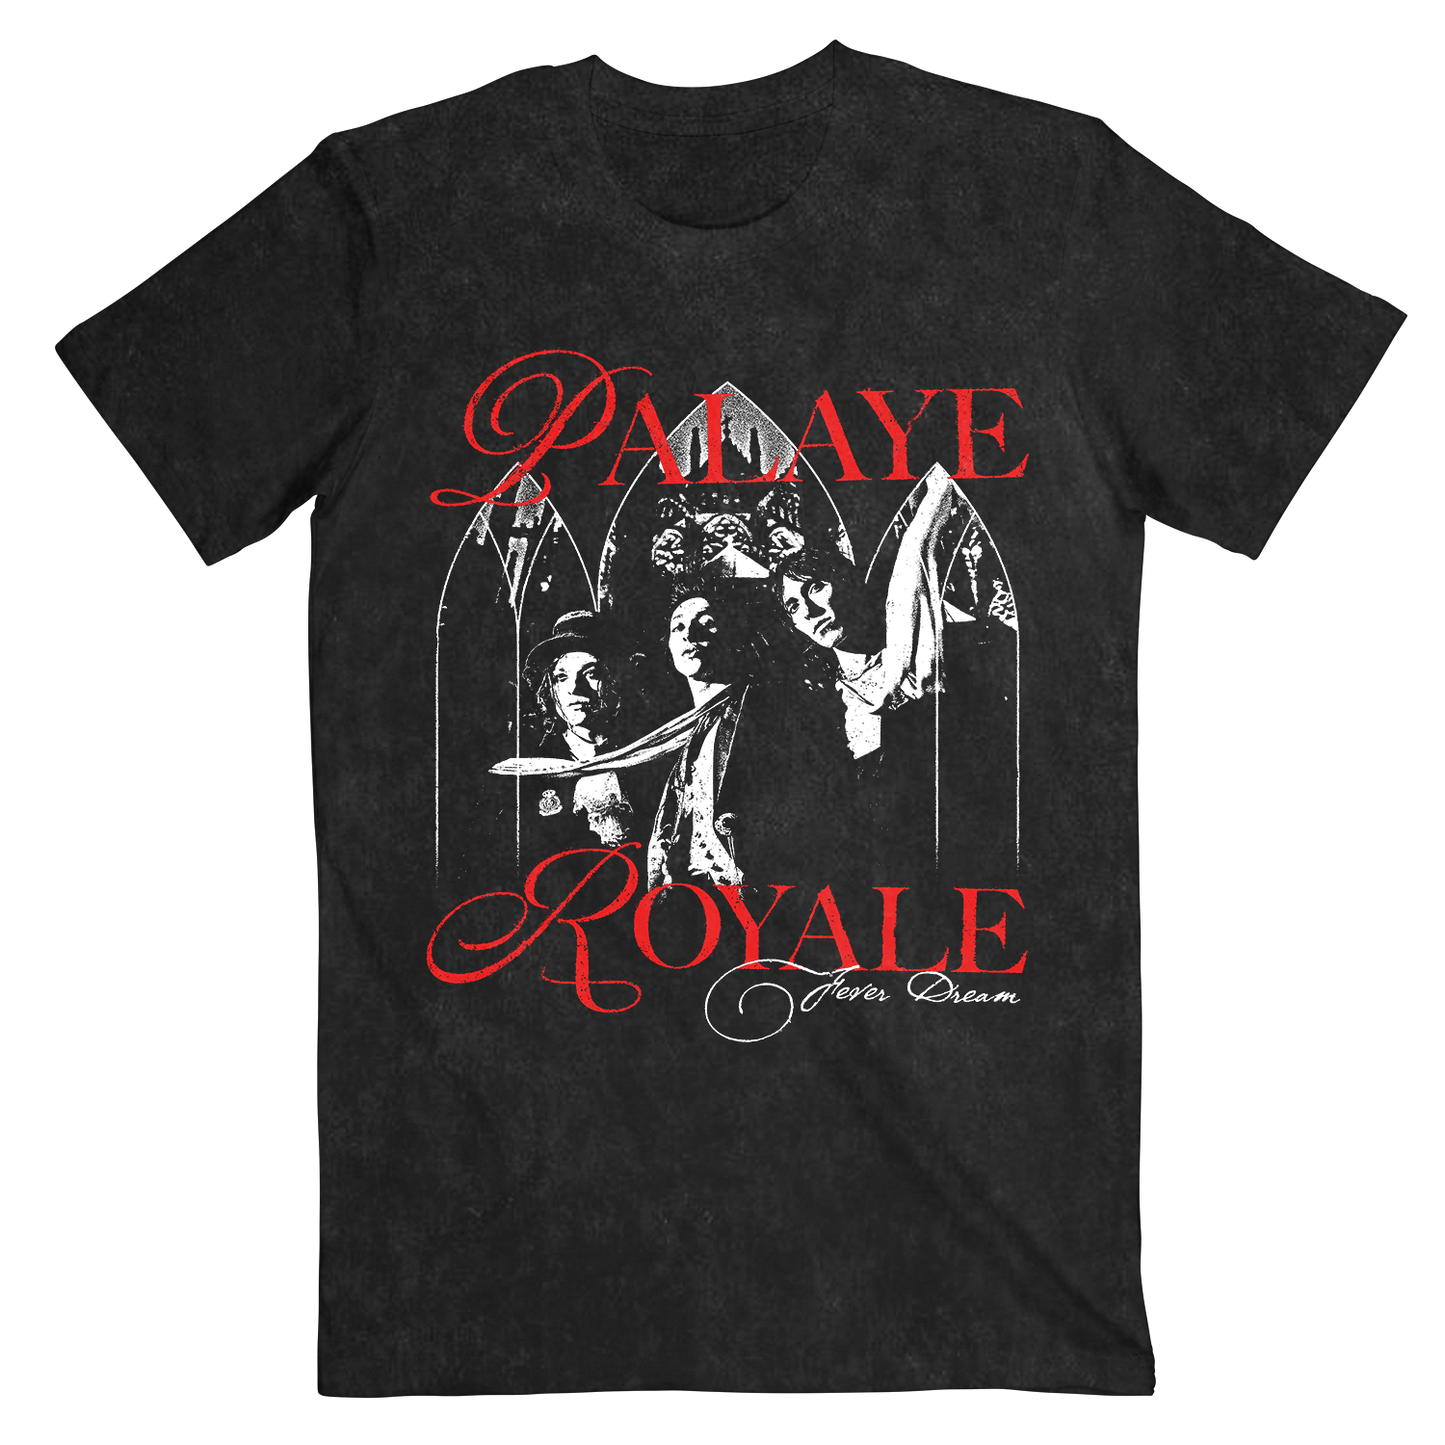 Palaye Royale Black "Arches" Tee